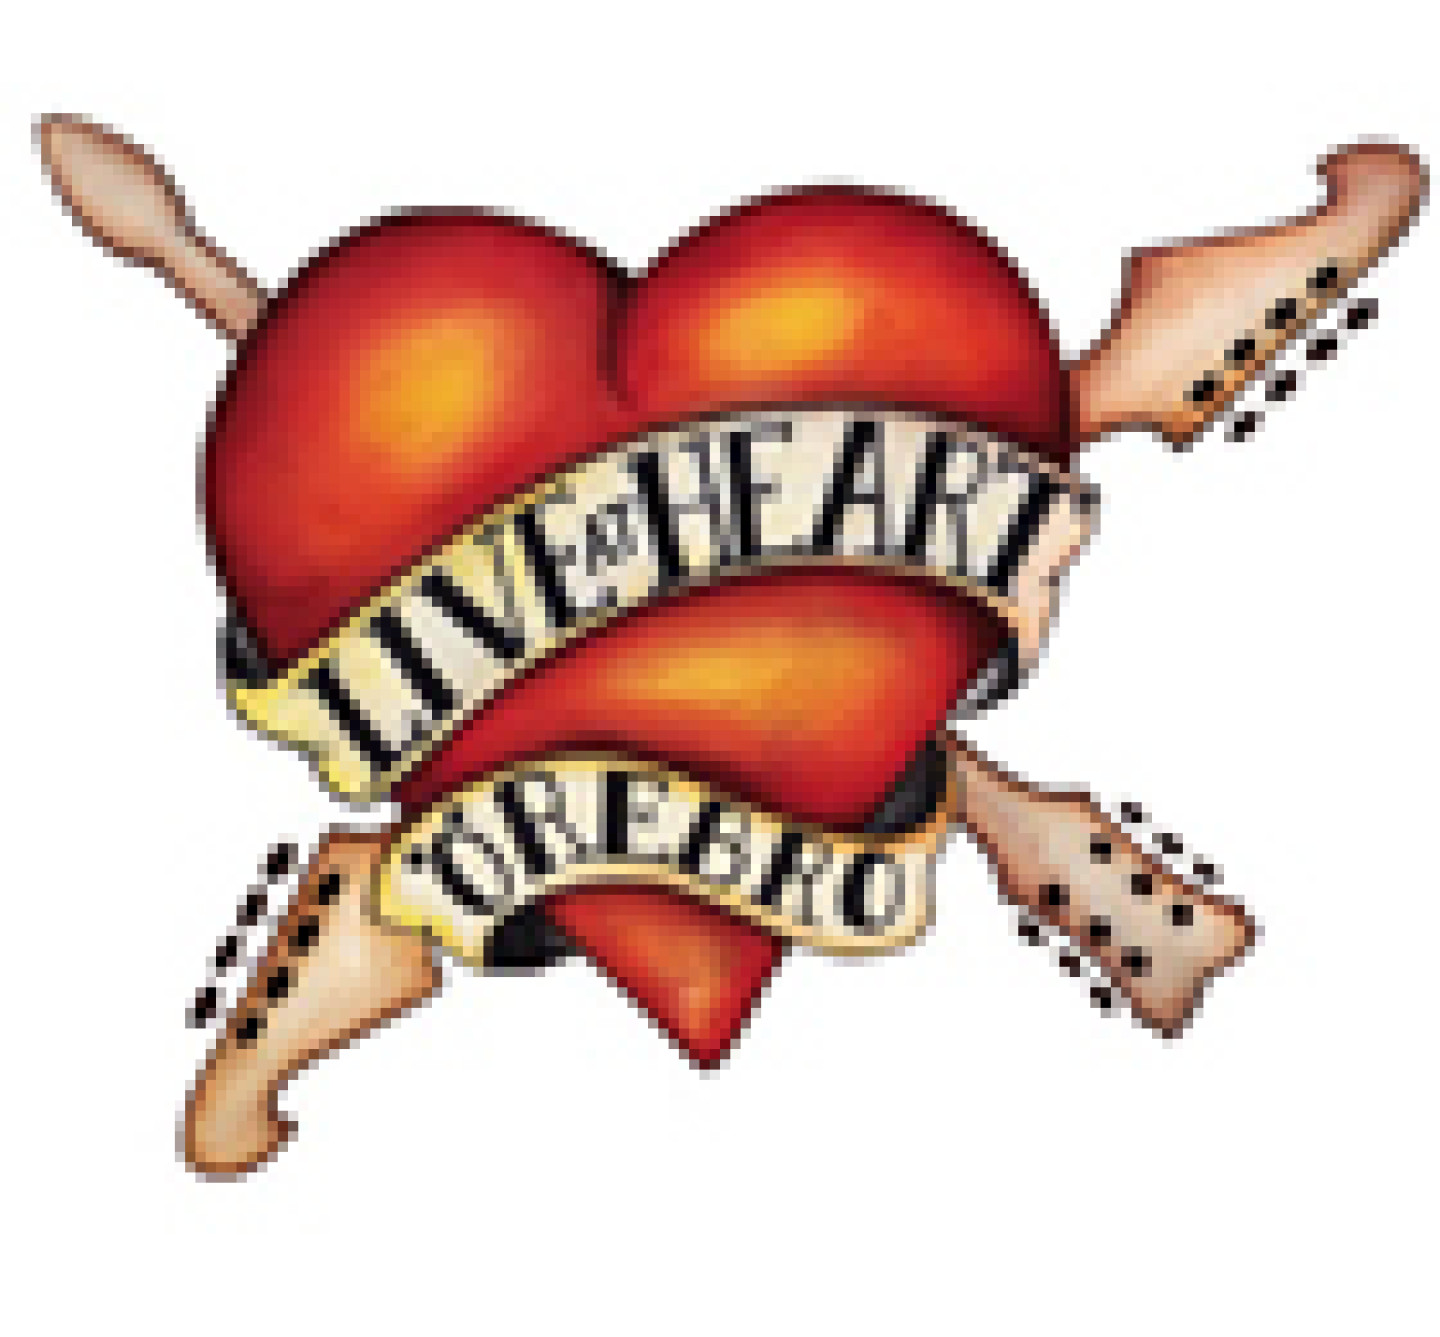 Live at Heart